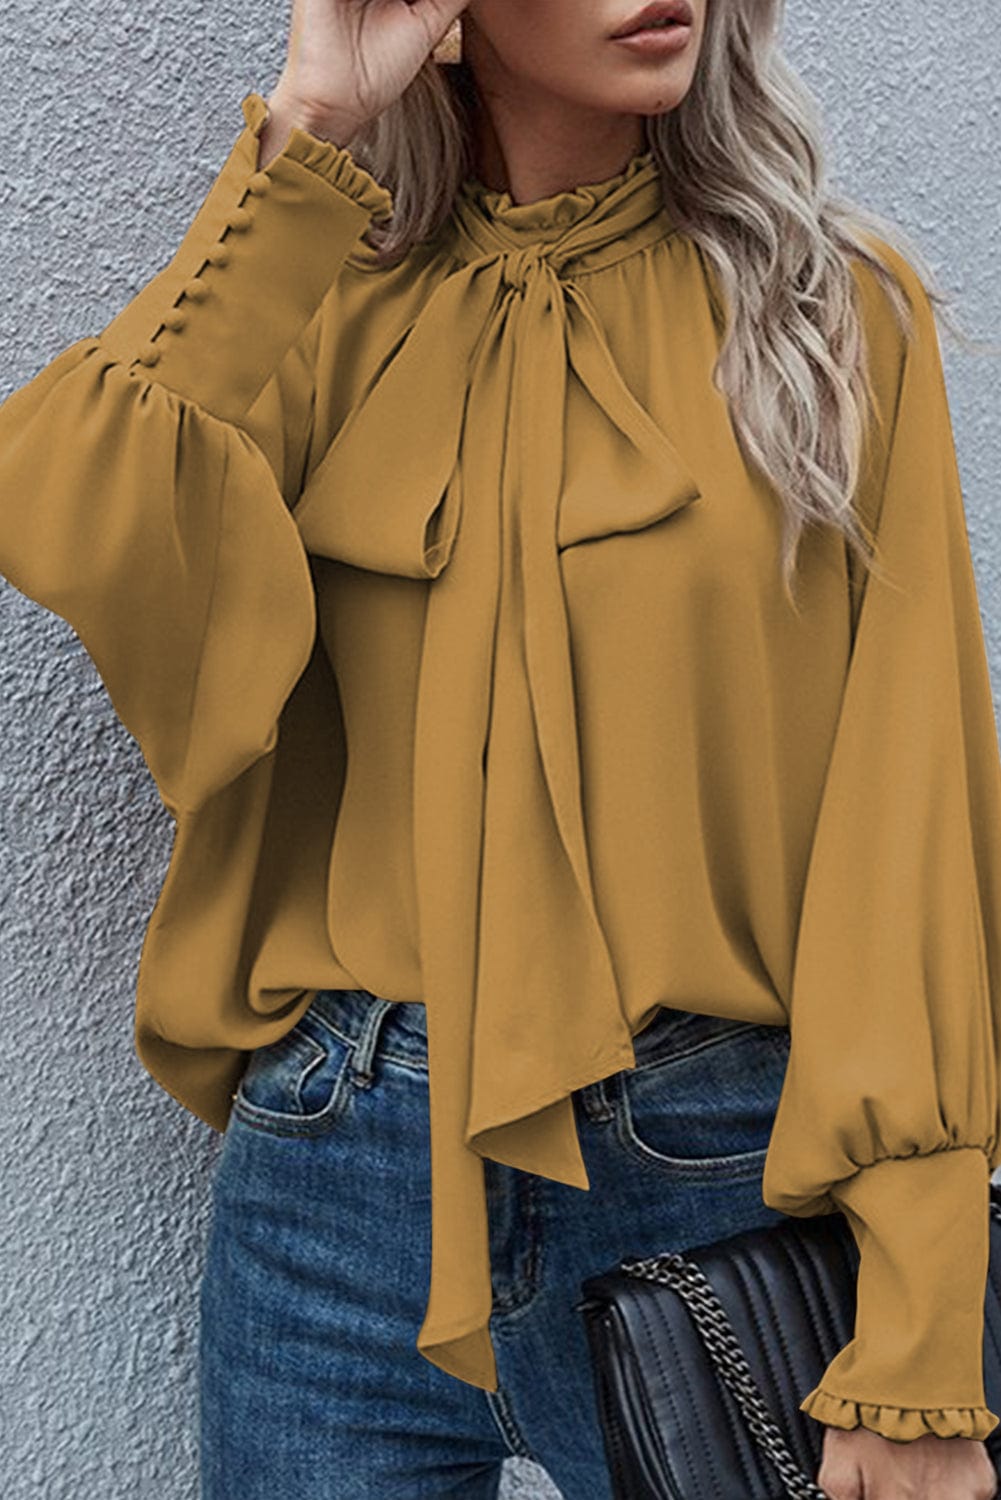 The802Gypsy  Tops Mustard / S / 100%Polyester Traveling Gypsy Frilled Mock Neck Bishop Sleeve Blouse